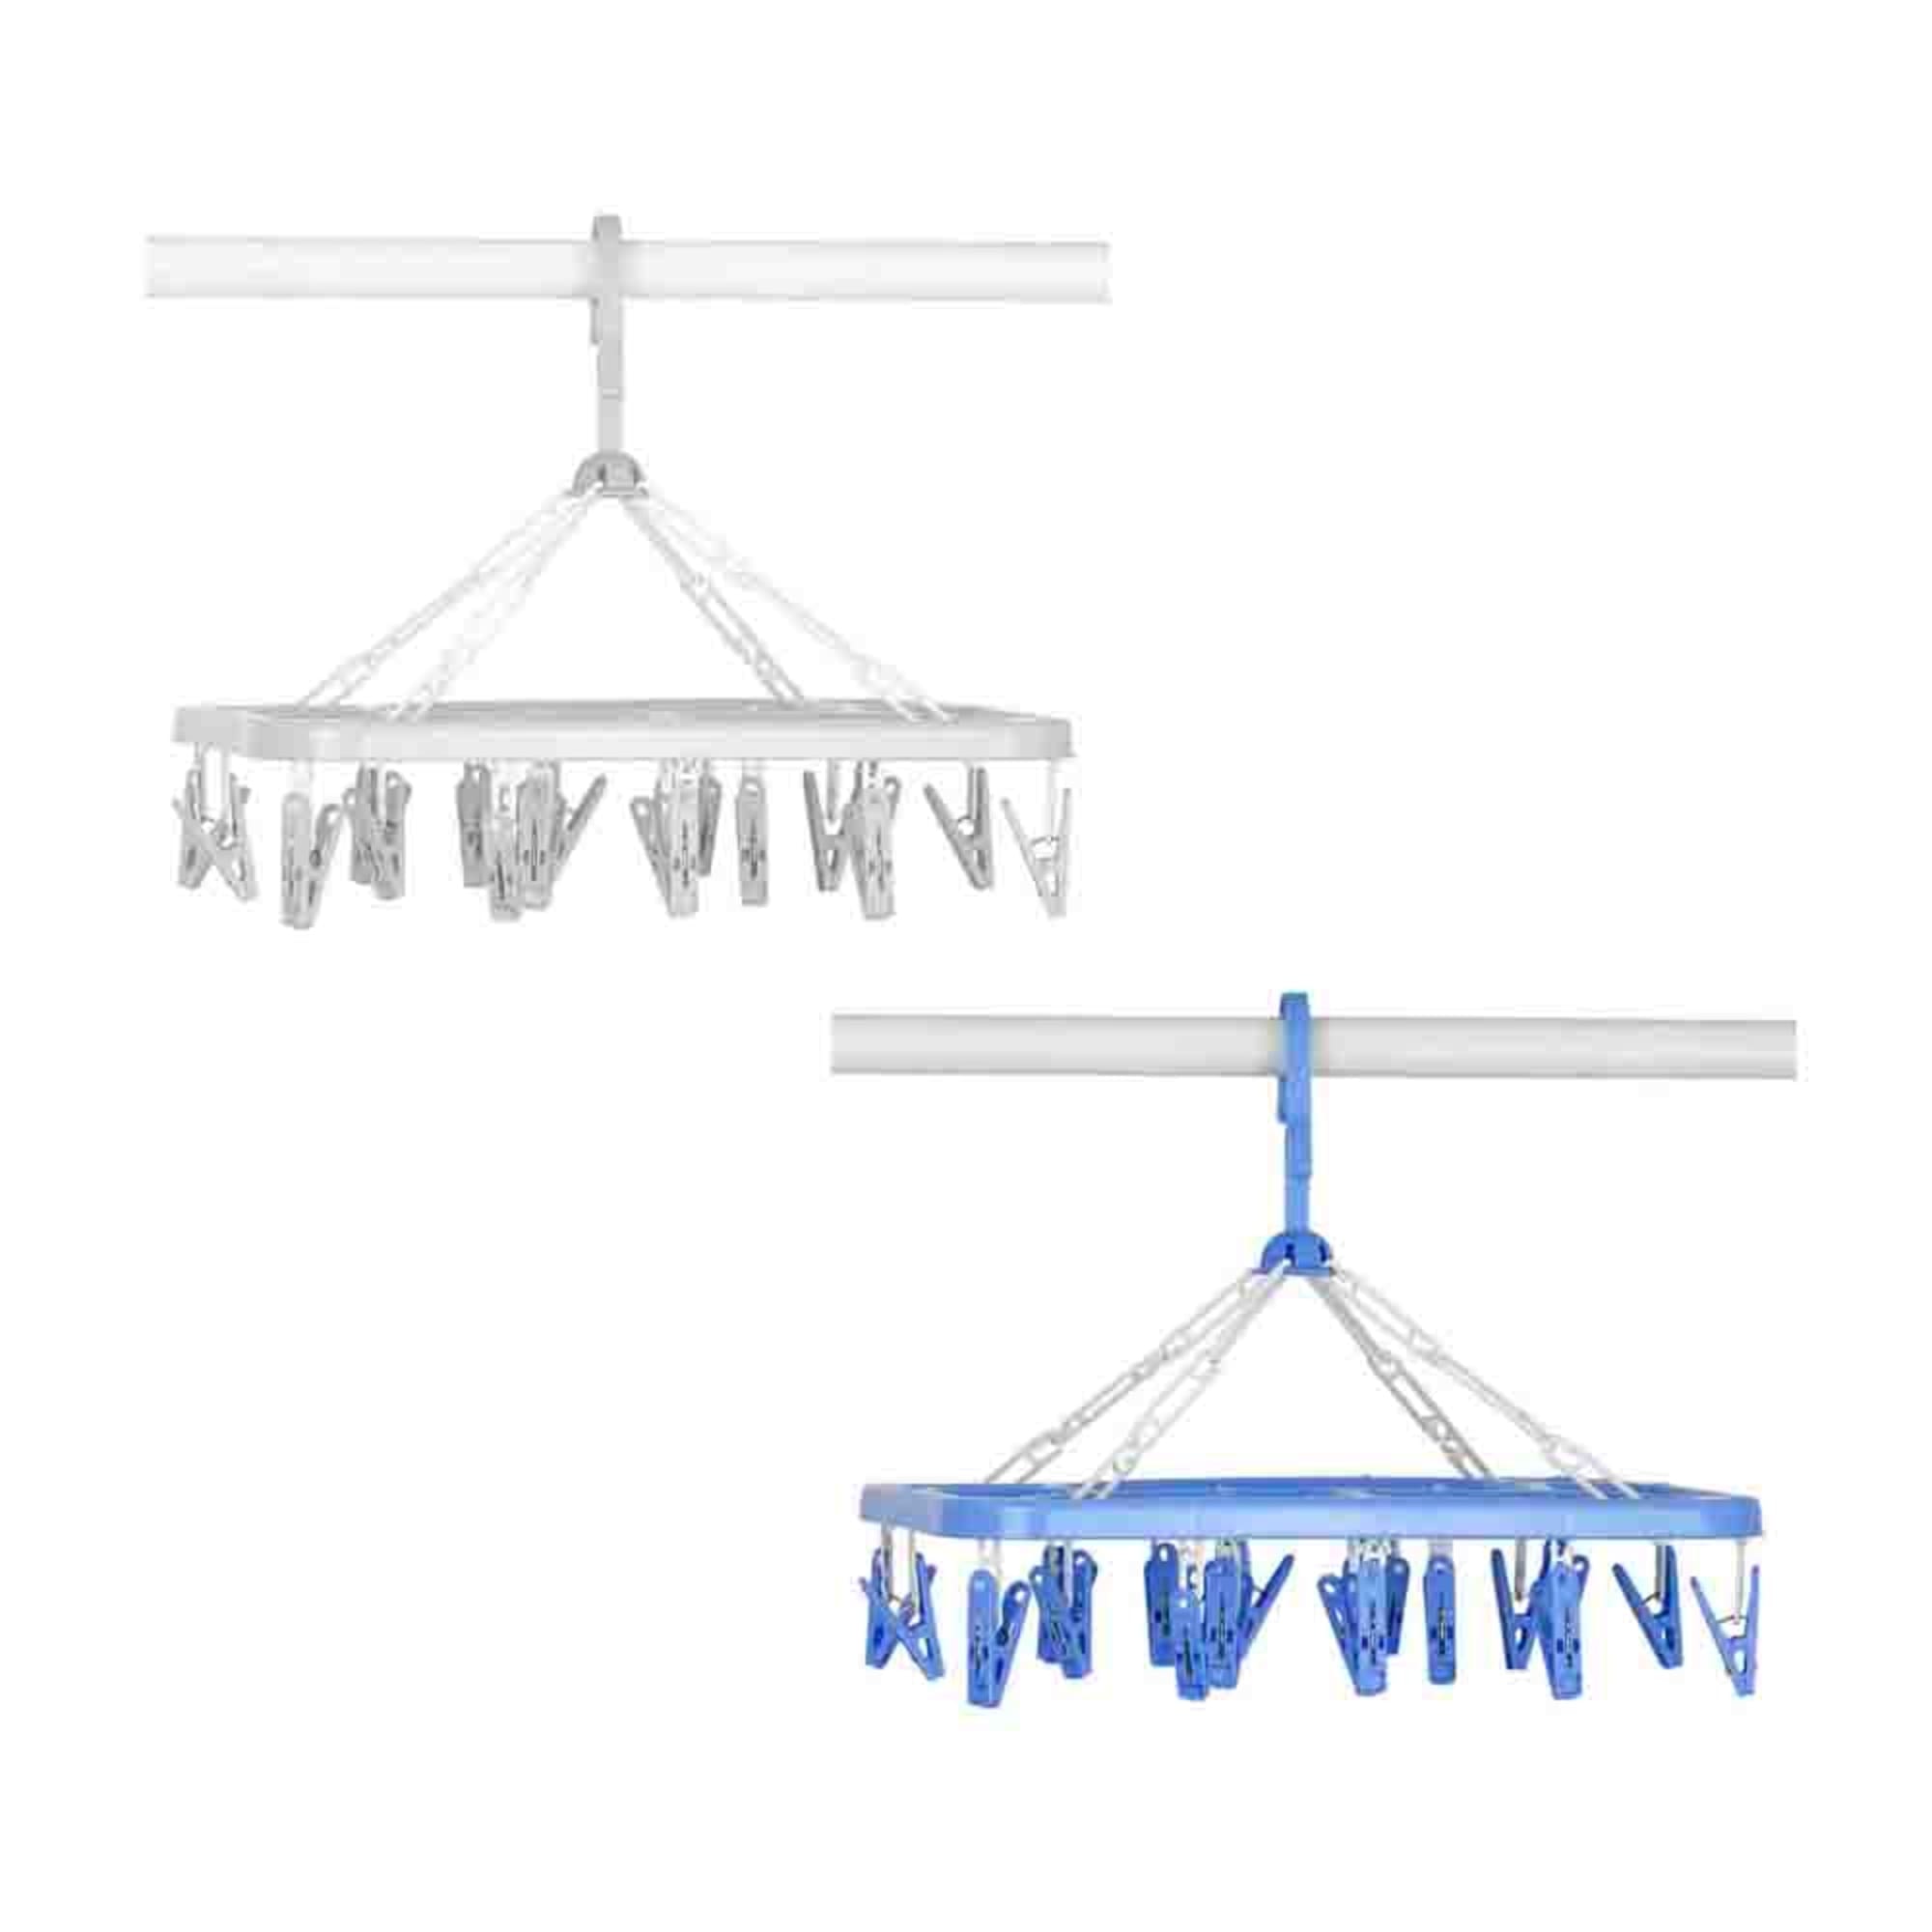 Home Basics Hanging Drying Rack $3.00 EACH, CASE PACK OF 24